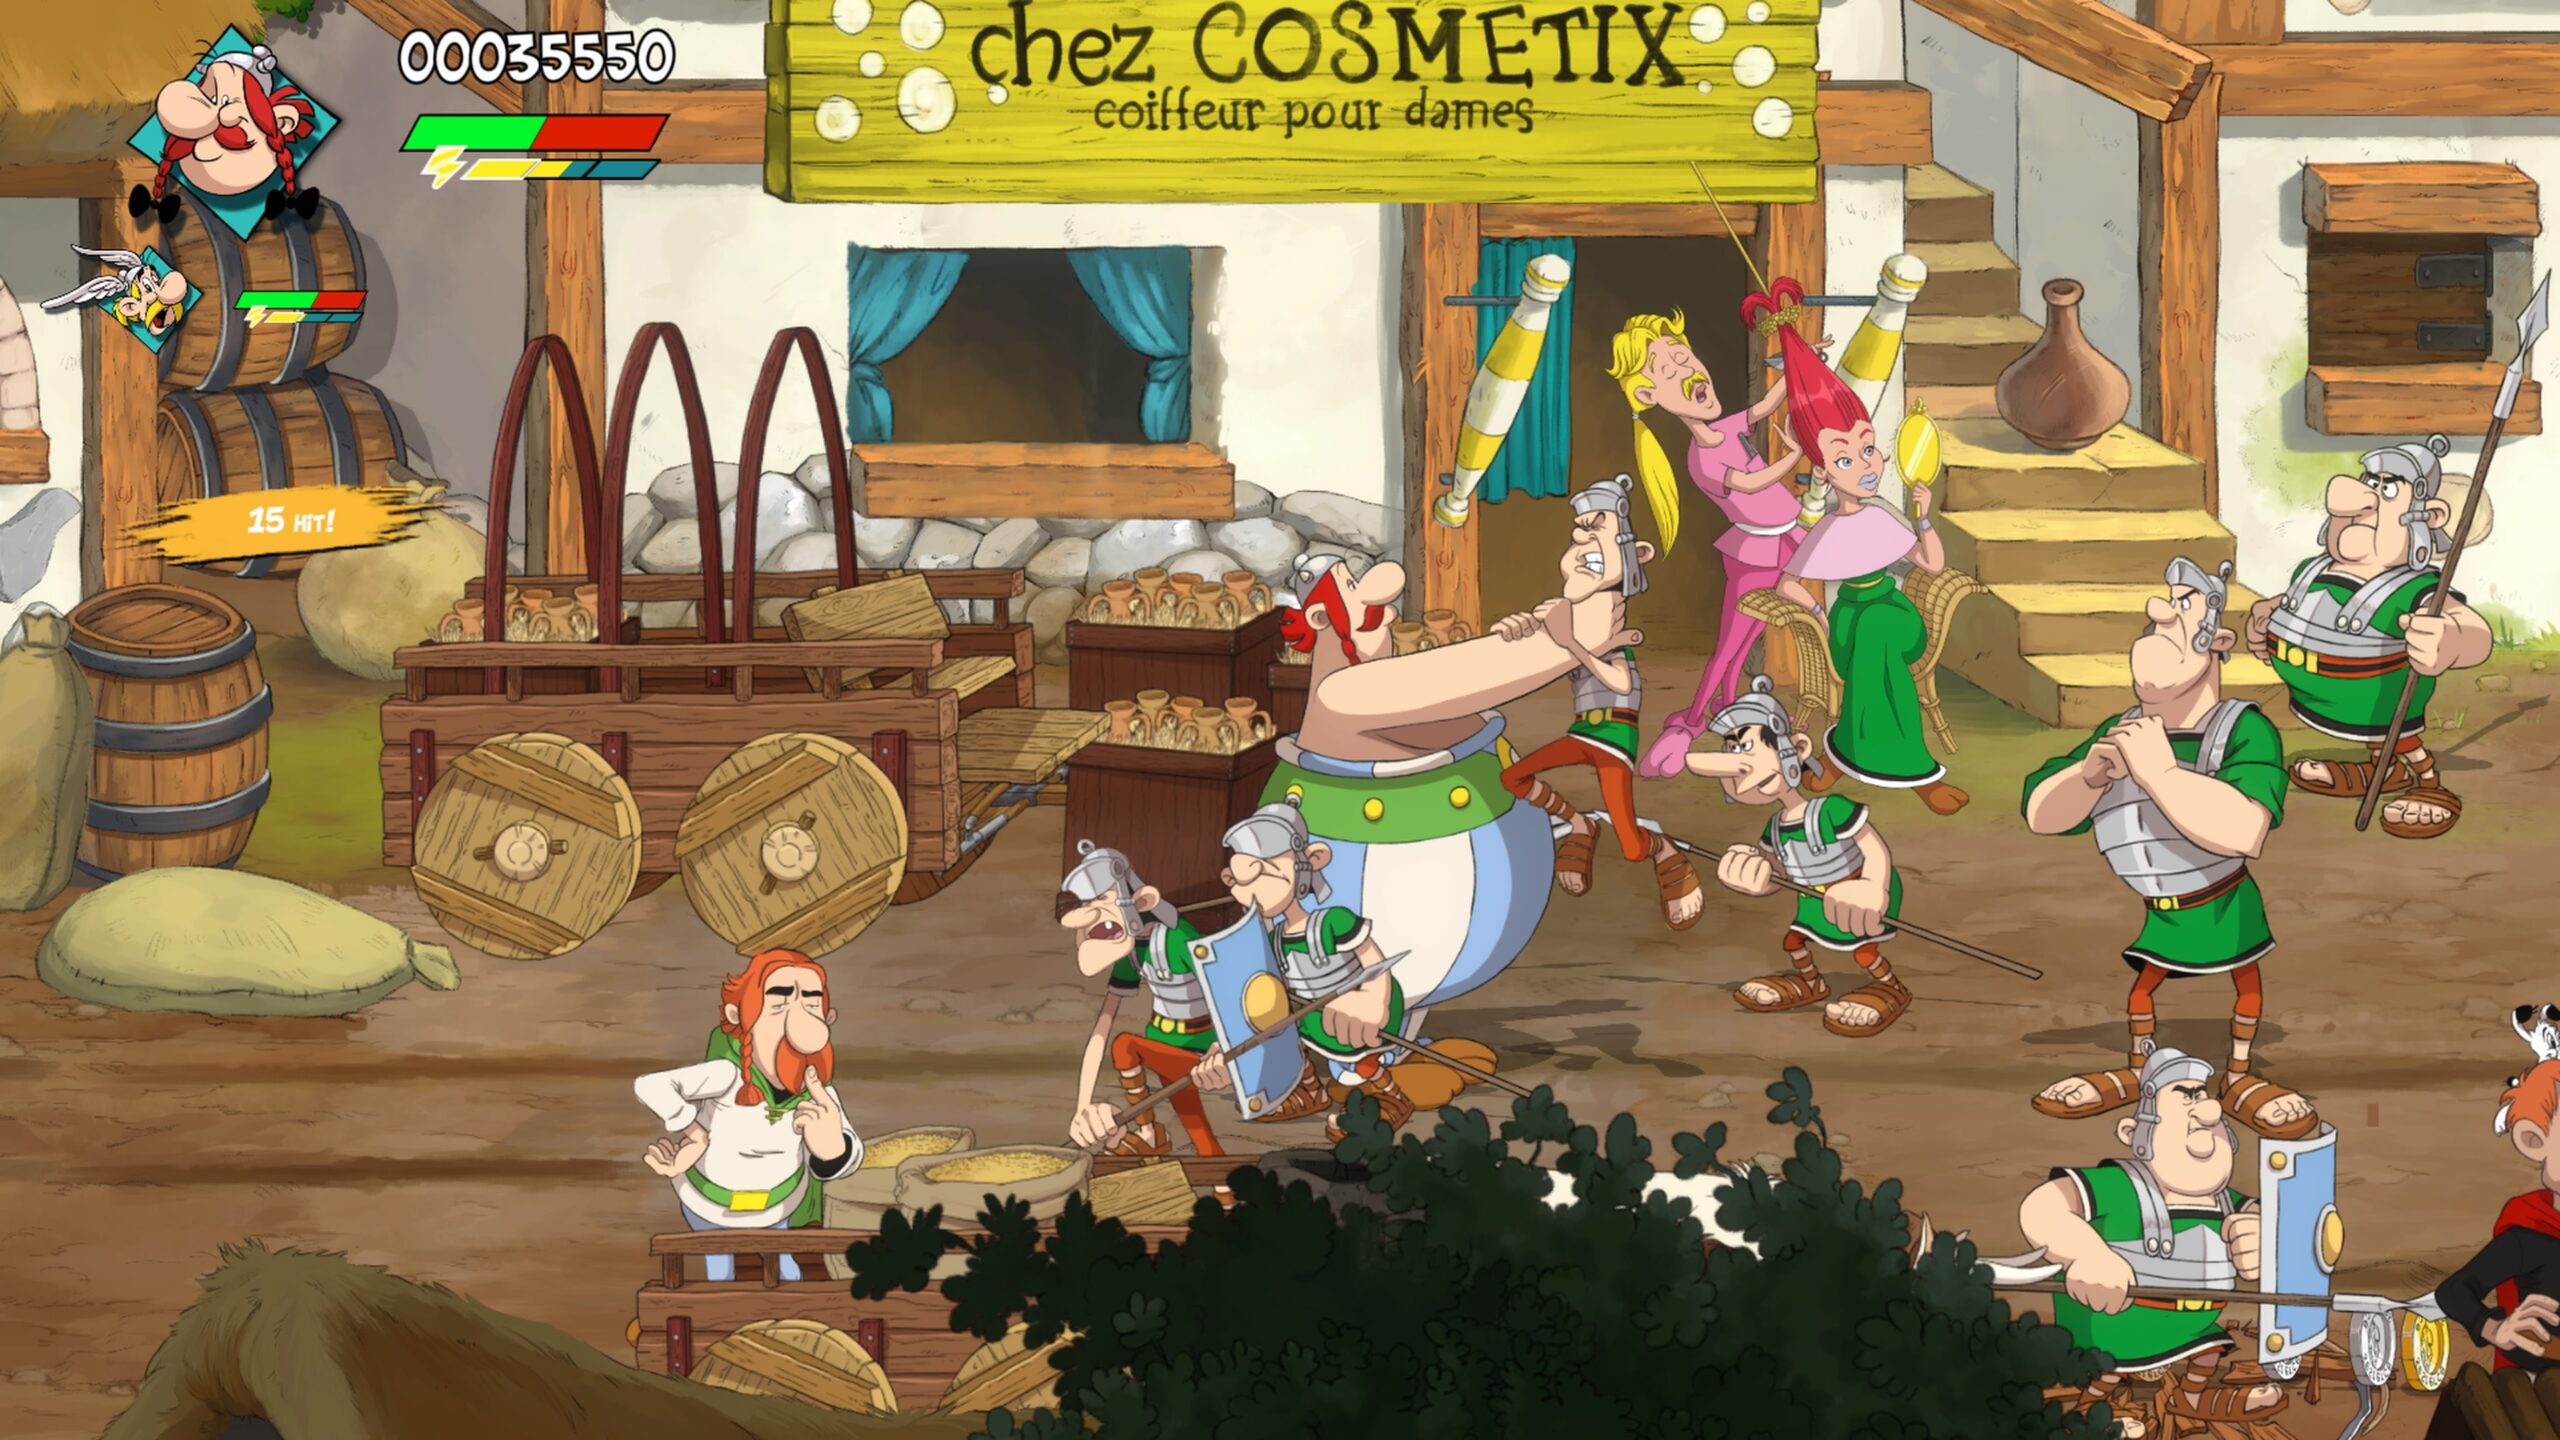 Asterix & Obelix are back with a brand new game